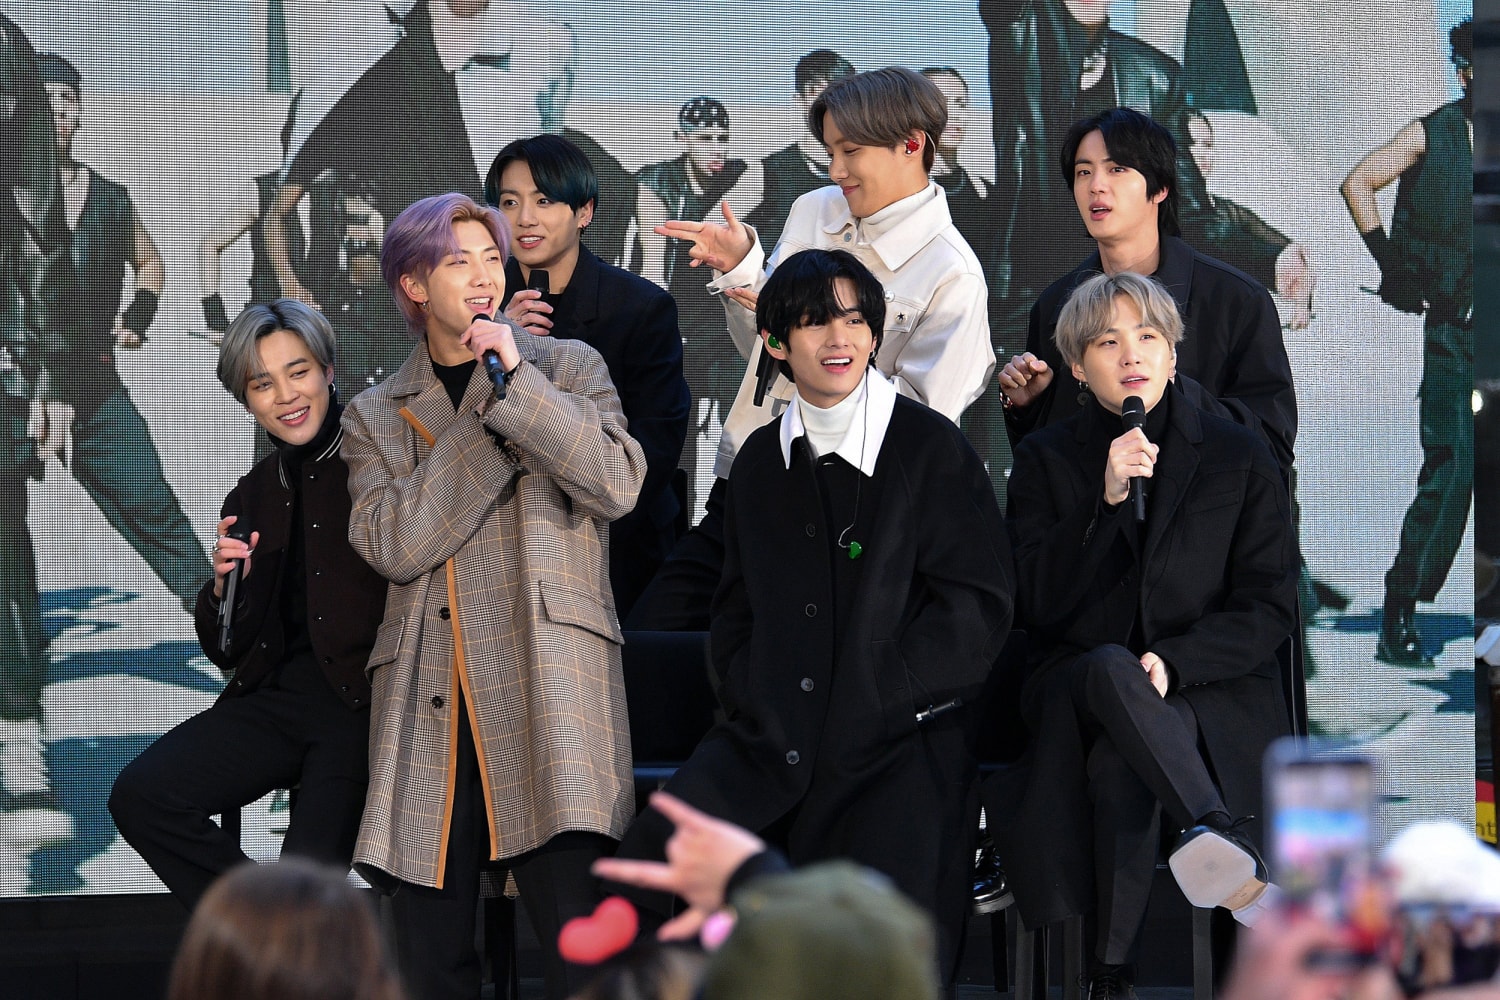 Bts Broke A Virtual Attendance Record With Remote Show